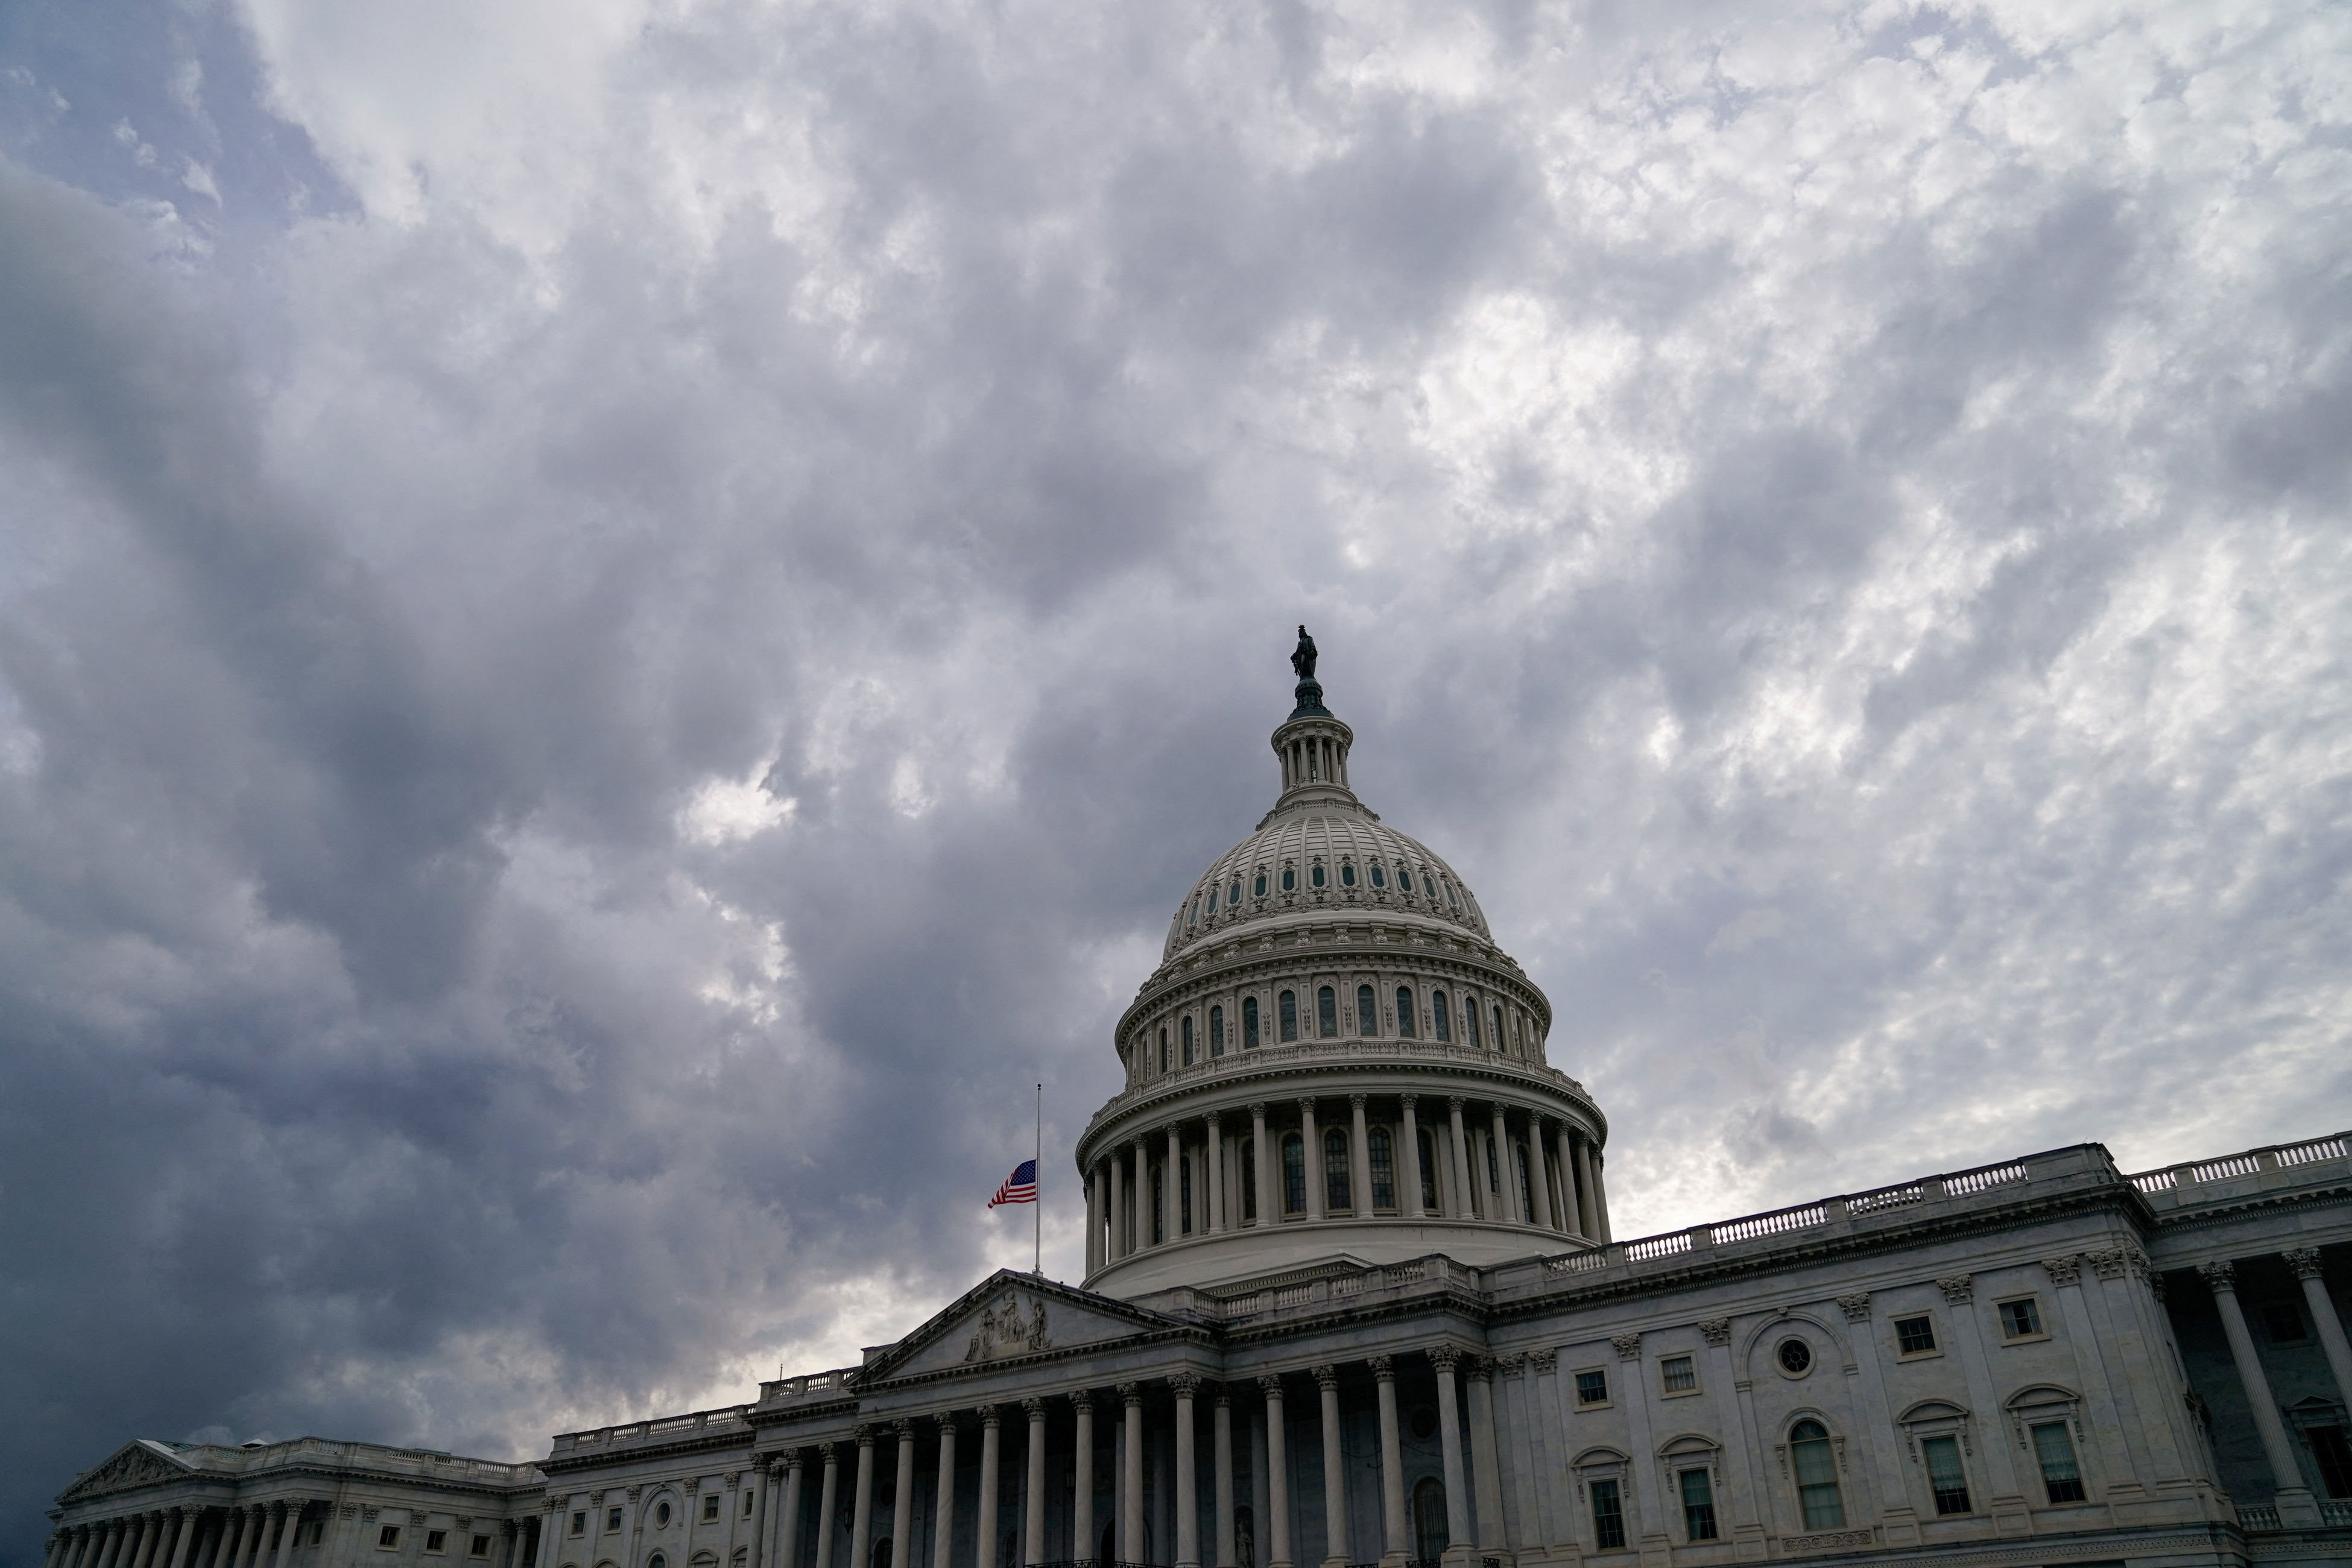 Clouds form over the U.S. Capitol in Washington